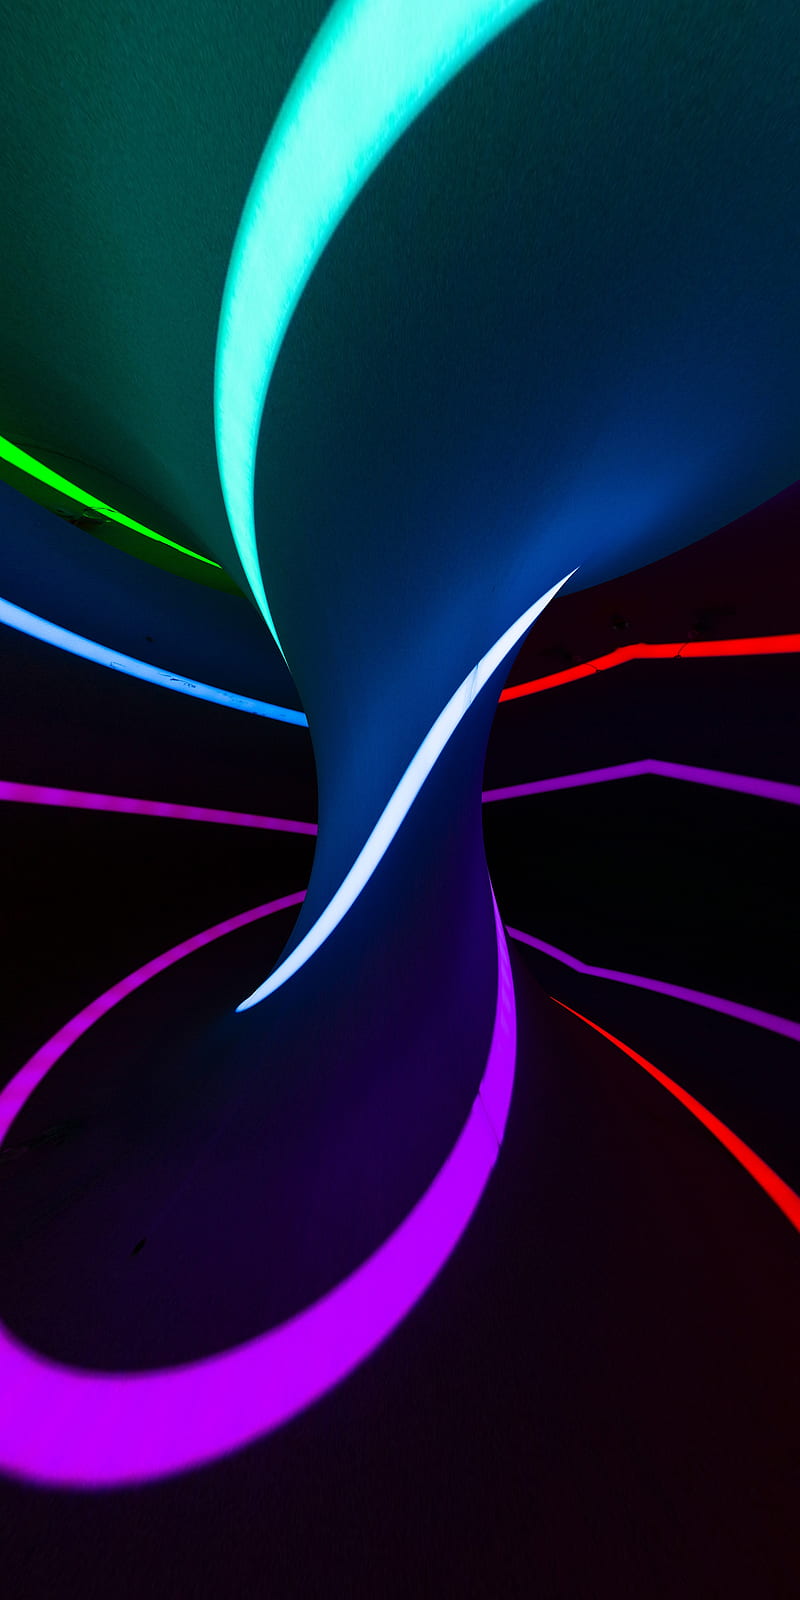 Neon light Tunnel 3D, QUBIX, black, blue, colorful, colors, cyan, dark, decor, flowing, glow, green, lamp, lighting, lights, lines, live, neonify, neons, night, orange, pink, purple, red, star, stripes, violet, white, yellow, HD phone wallpaper